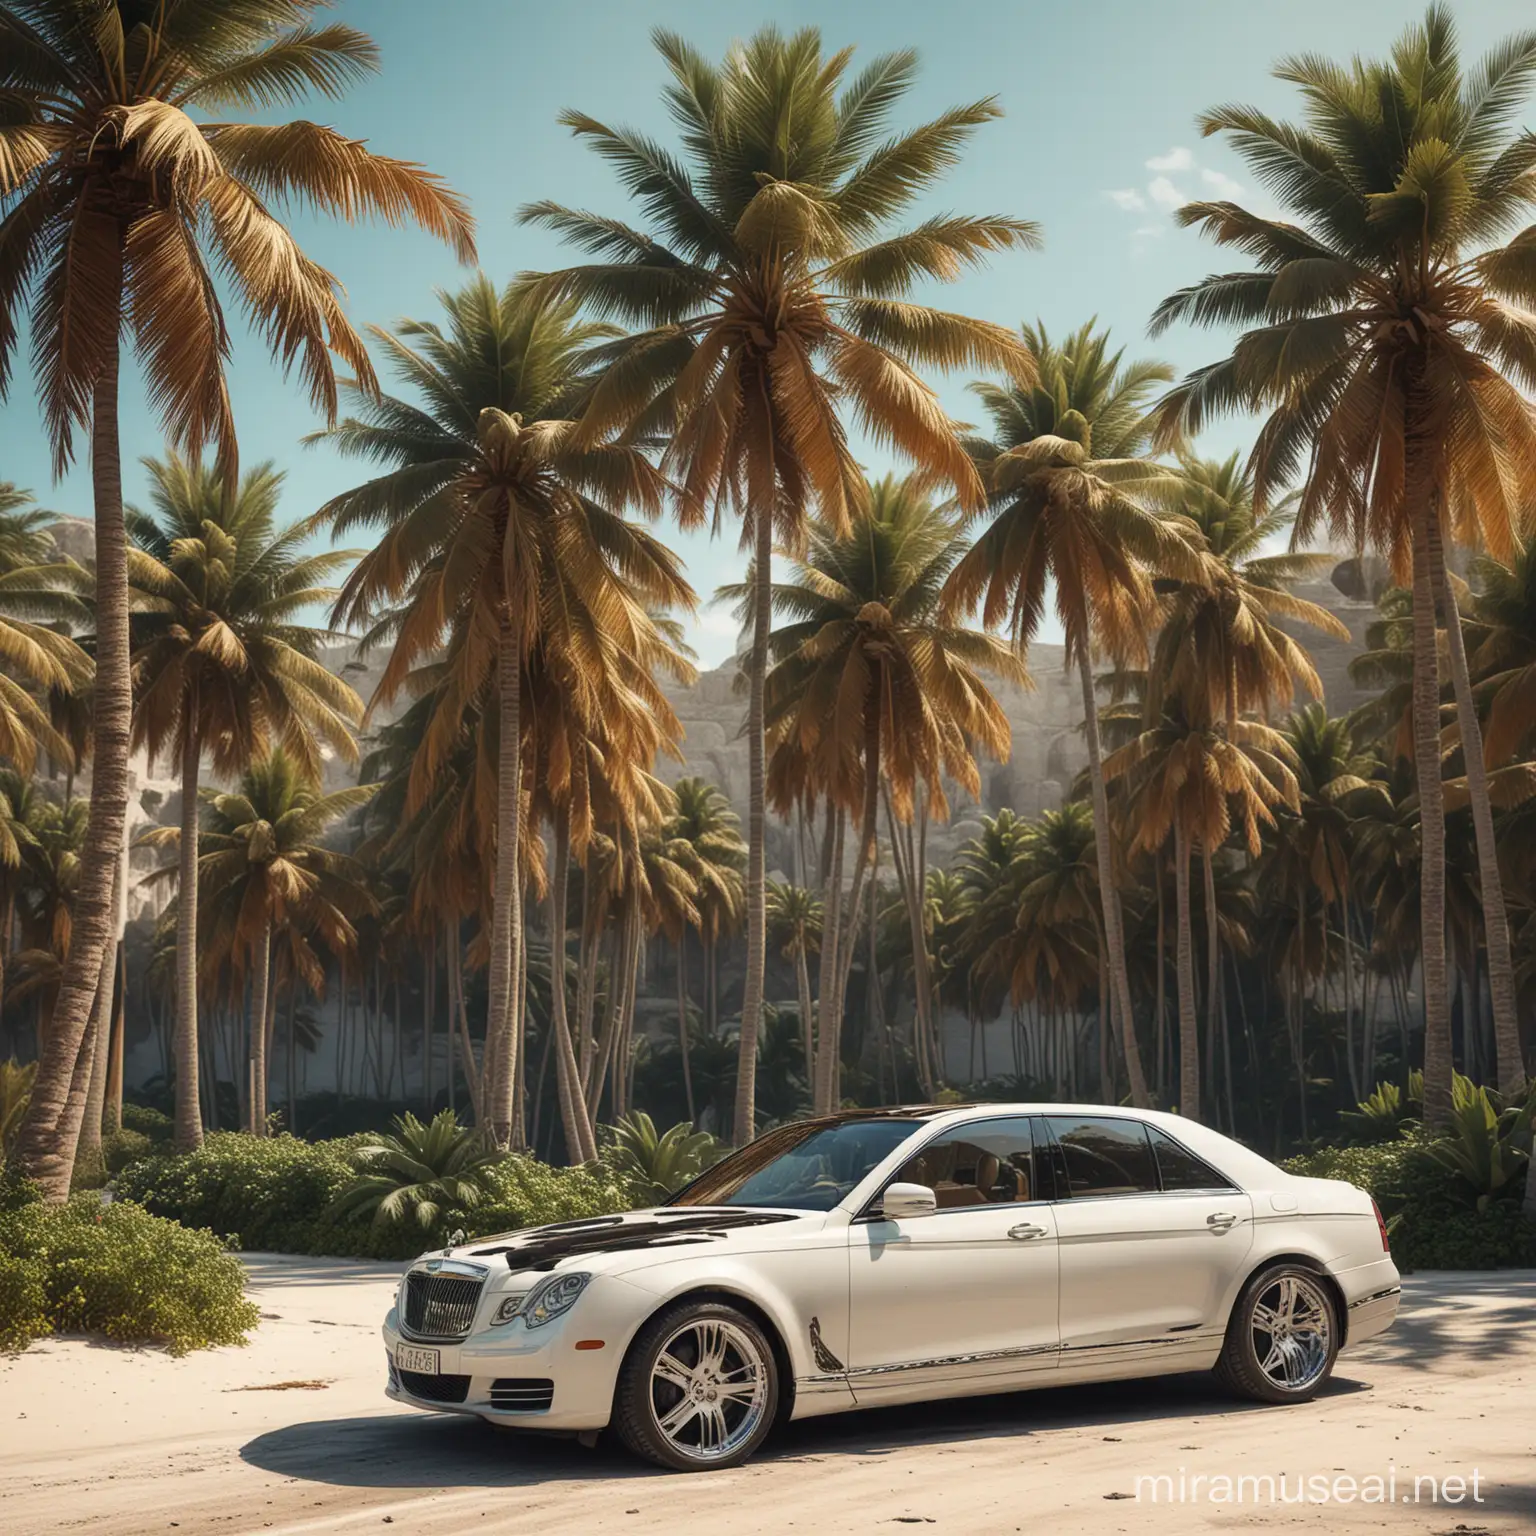 Luxury Car Amidst Beach and Palm Trees Summertime Serenity